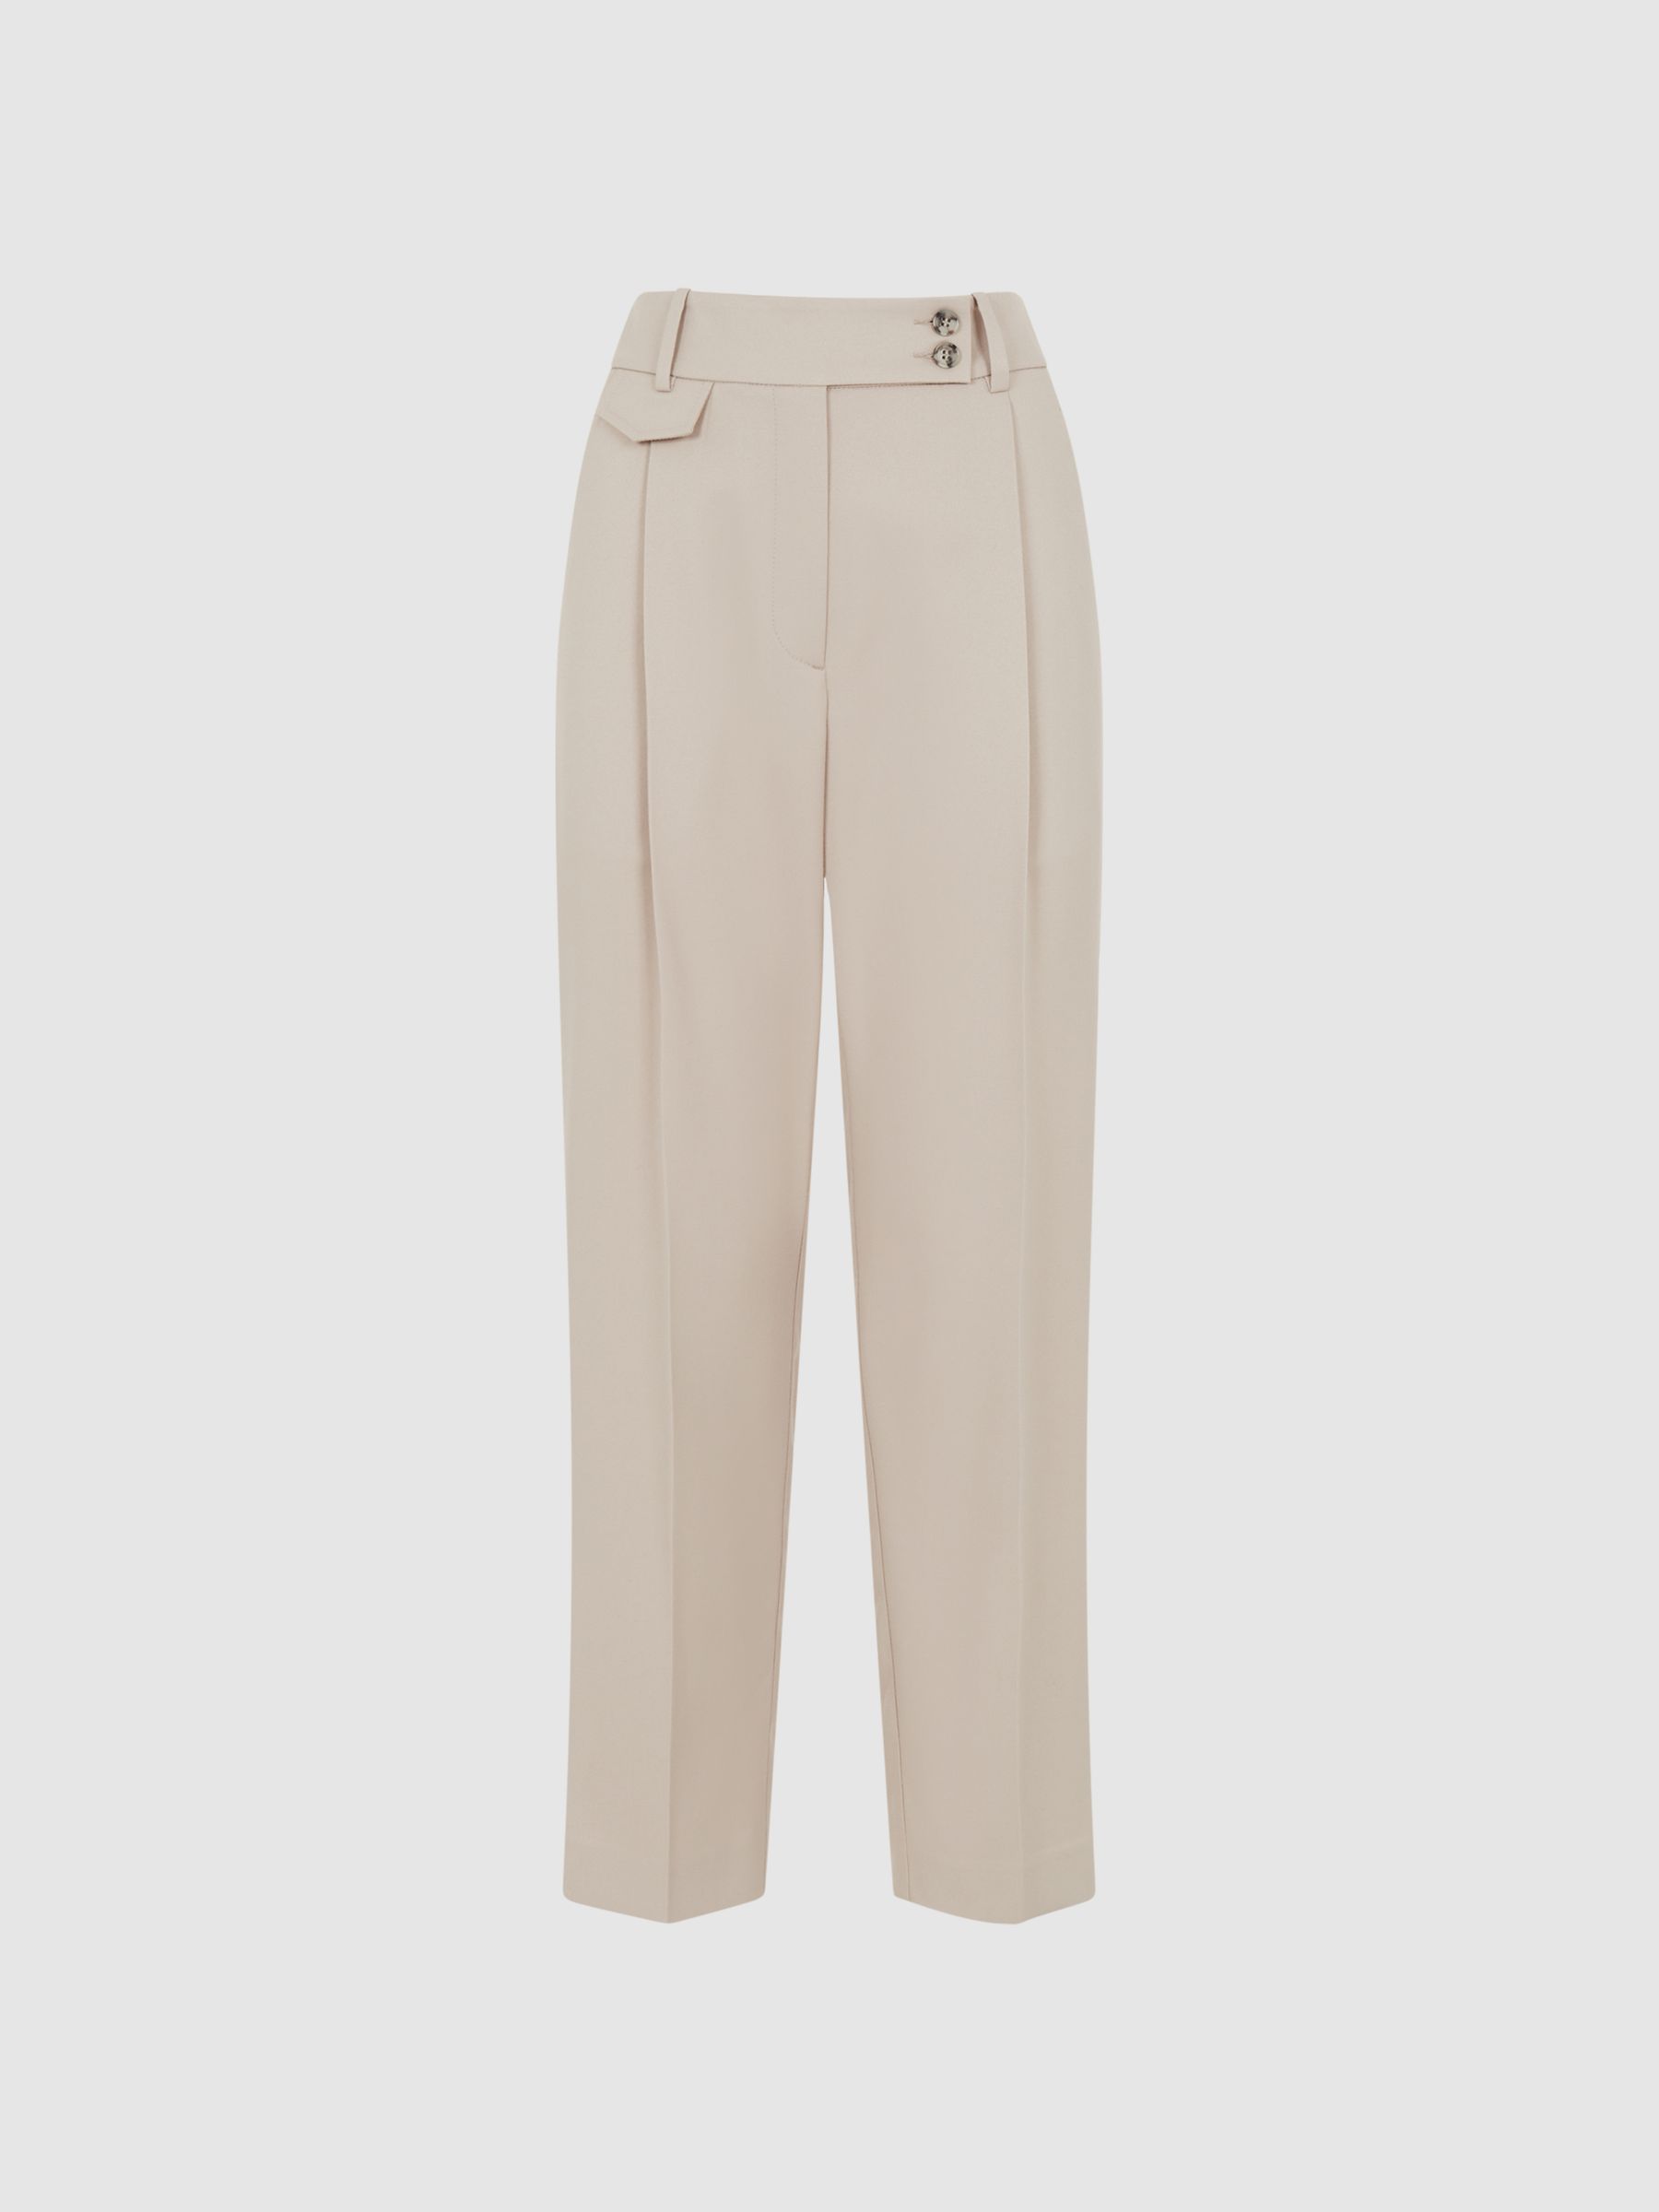 Reiss River High Rise Cropped Tapered Trousers - REISS